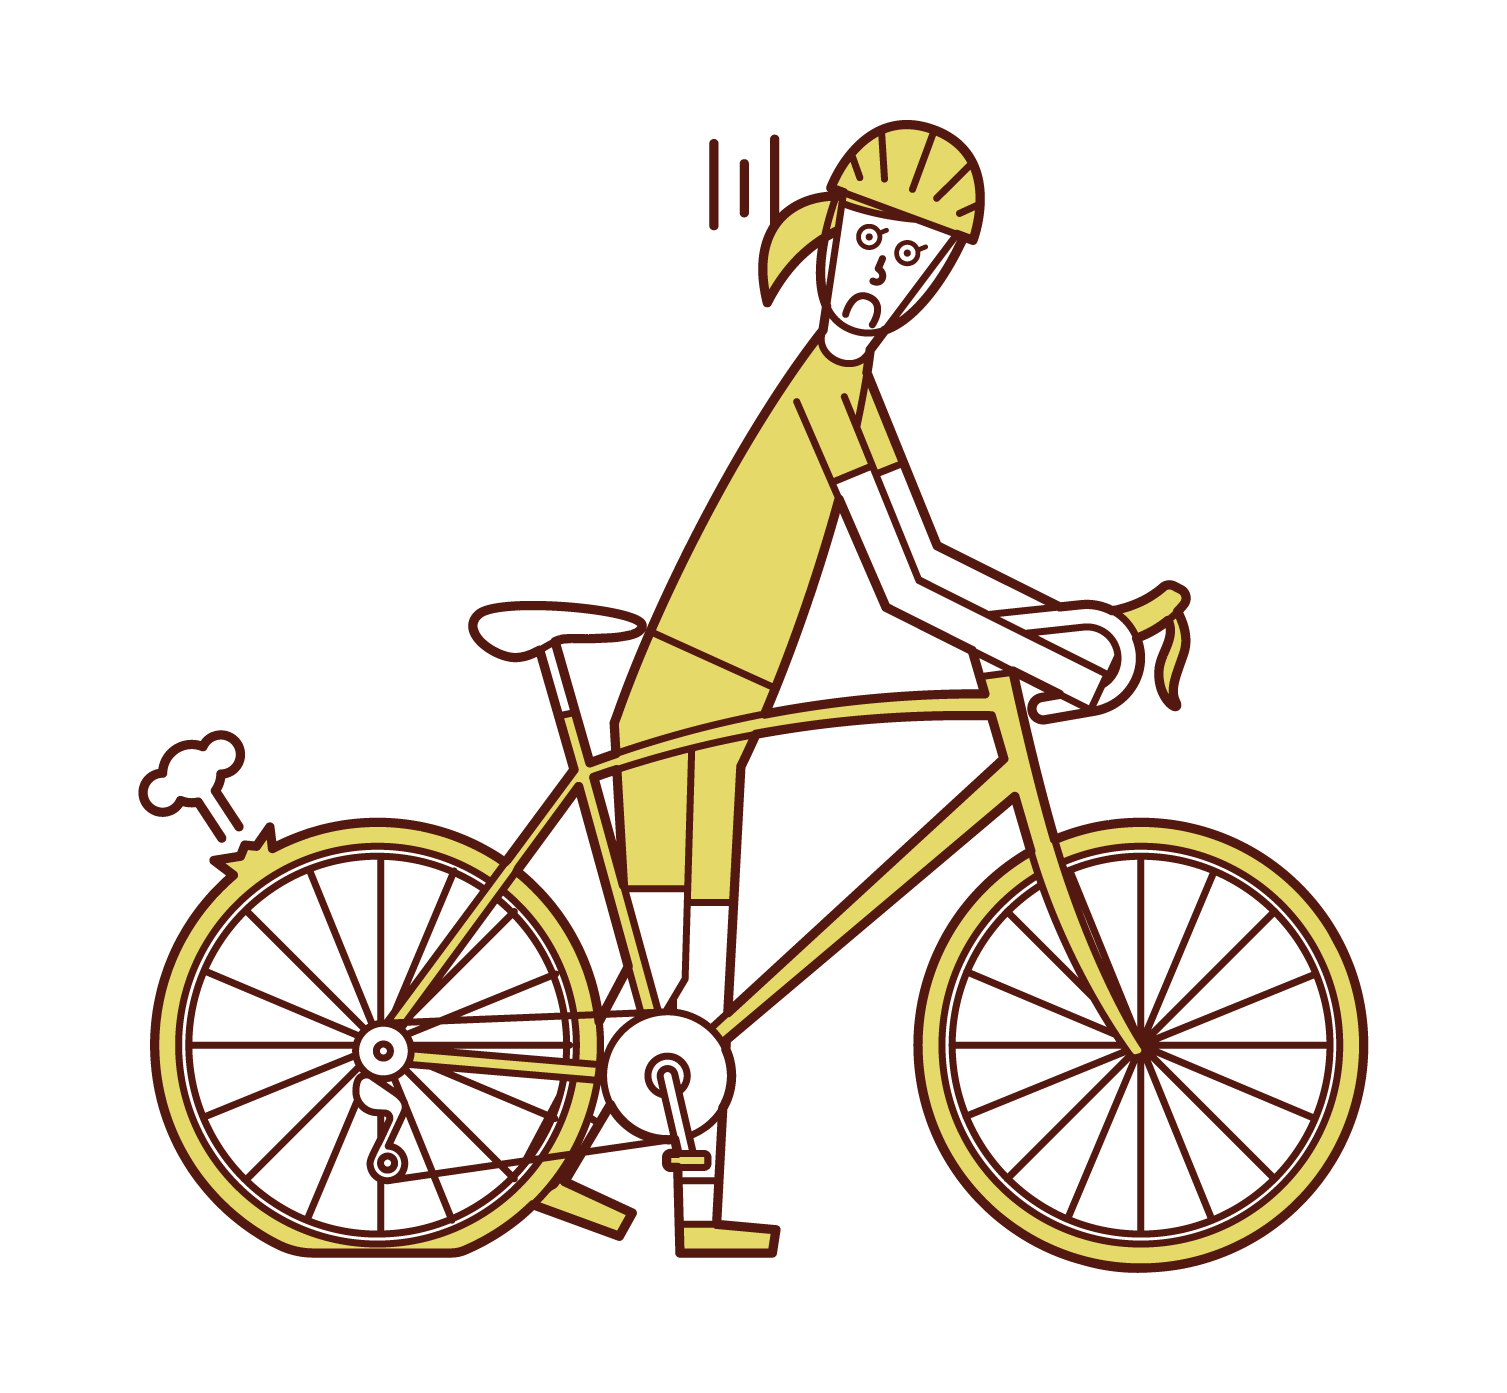 Illustration of a woman pushing a flat-hit bicycle